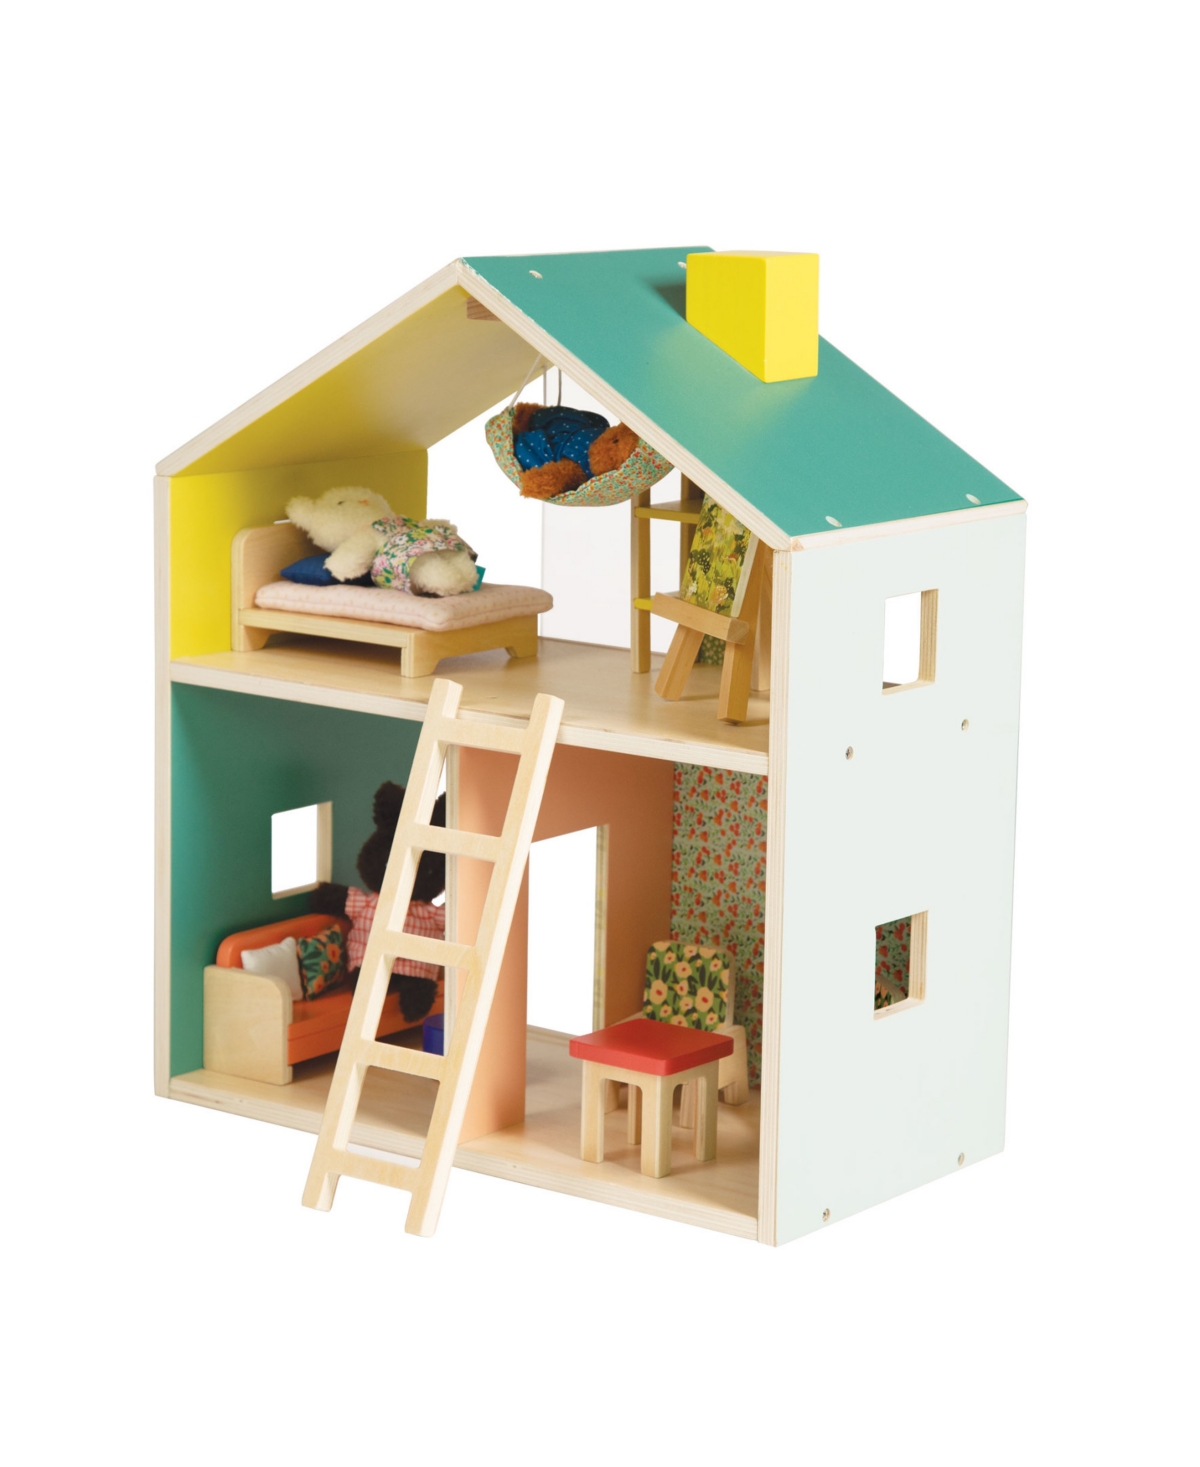 Manhattan Toy Company Kids' Little Nook 19-piece Wooden Playhouse With Loft In Multicolor